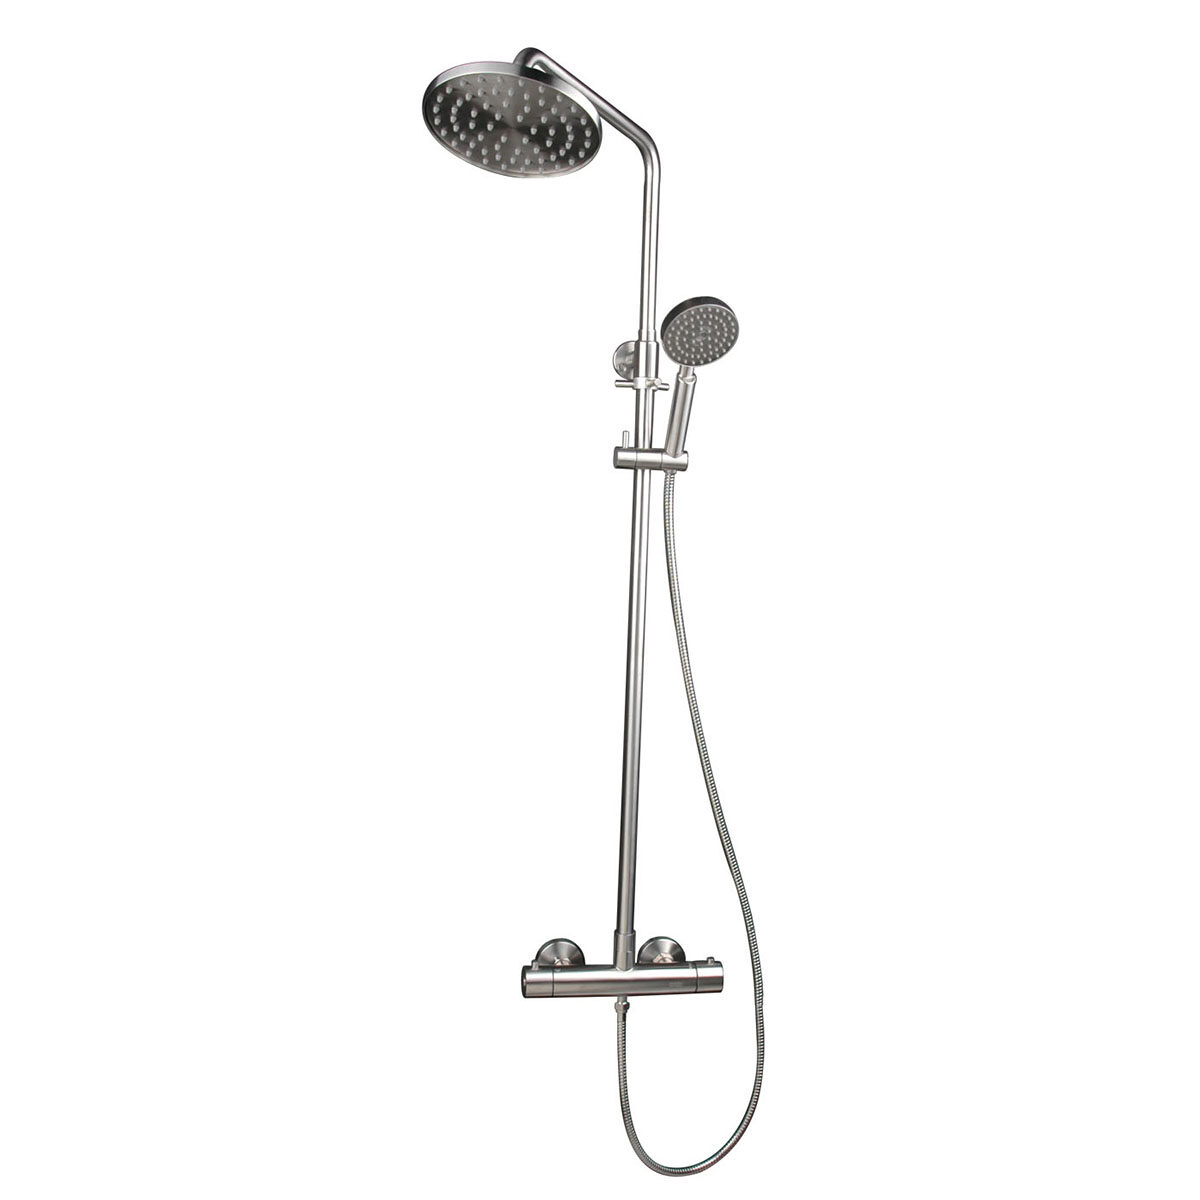 Stainless Steel Shower Bathtub Thermostatic Faucet Set,Thermostatic Shower Faucet Manufacturer Supplier